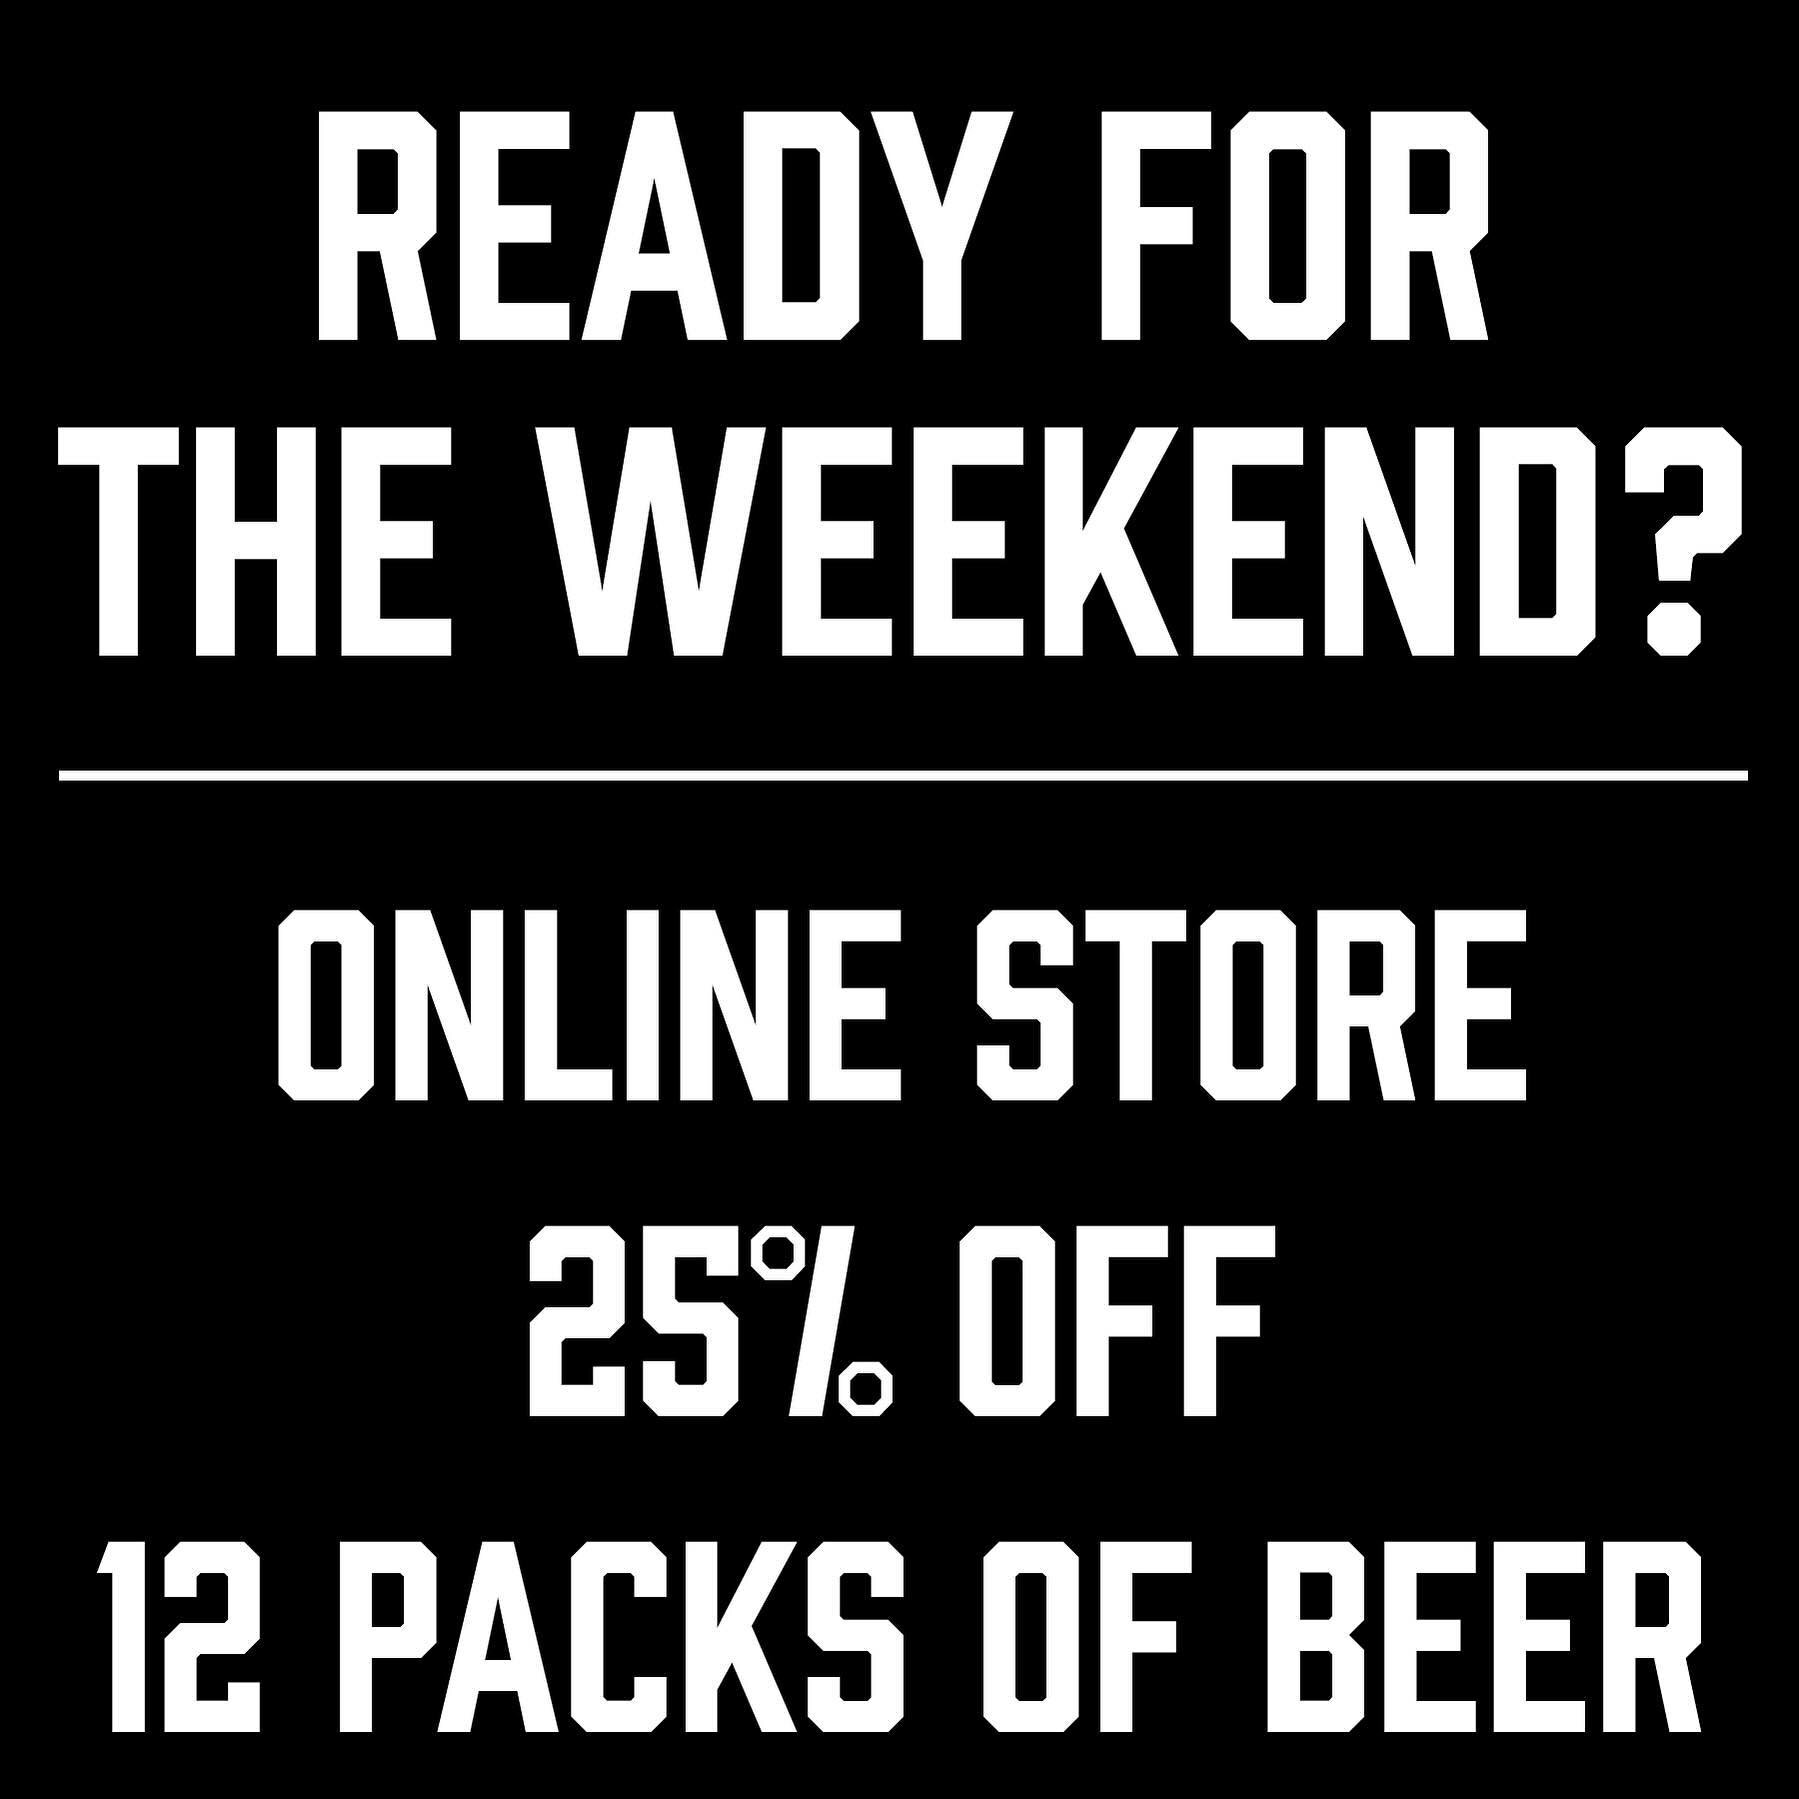 ☀️READY FOR THE WEEKEND?
👍WE ARE! 

🐰Take advantage of our Easter Sale on the online store
🏷️25% off all 12 packs of beer

Link in bio

Valid until Easter Monday 1st April at 11:59pm